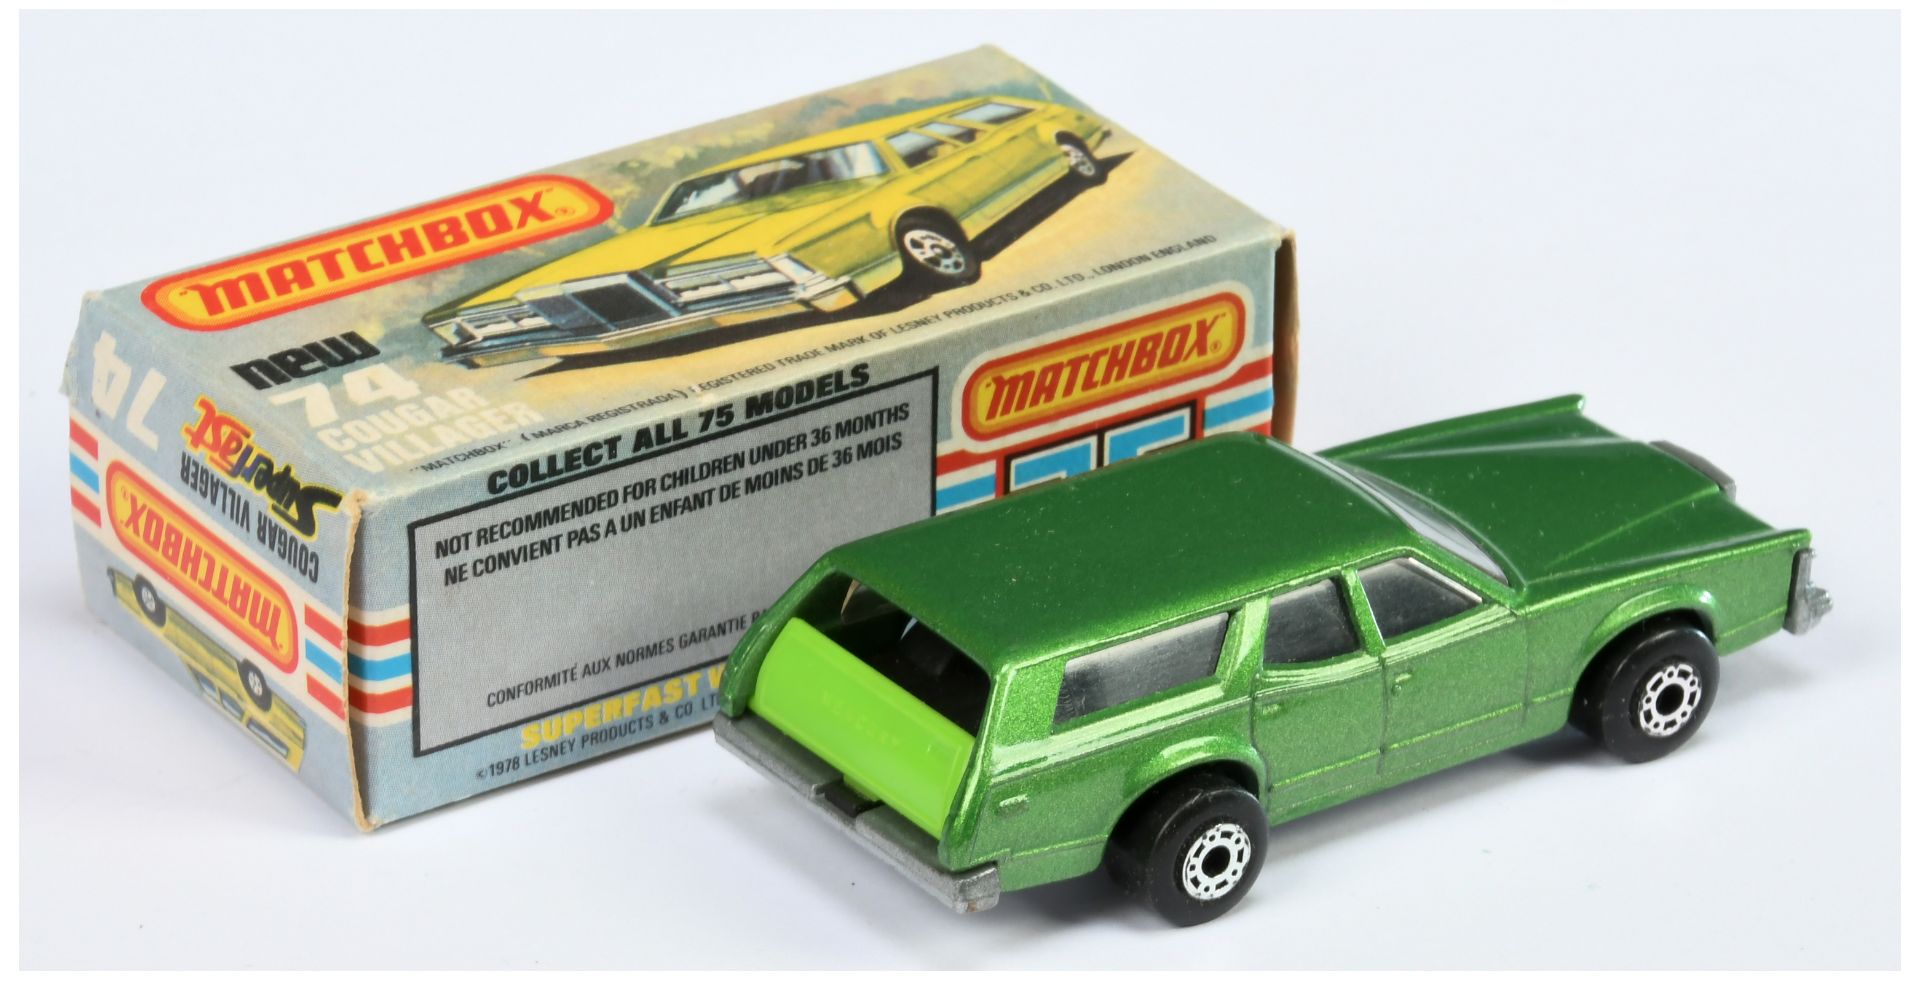 Matchbox Superfast 74c Mercury Cougar Villager MADE IN BULGARIA ISSUE - Image 2 of 3